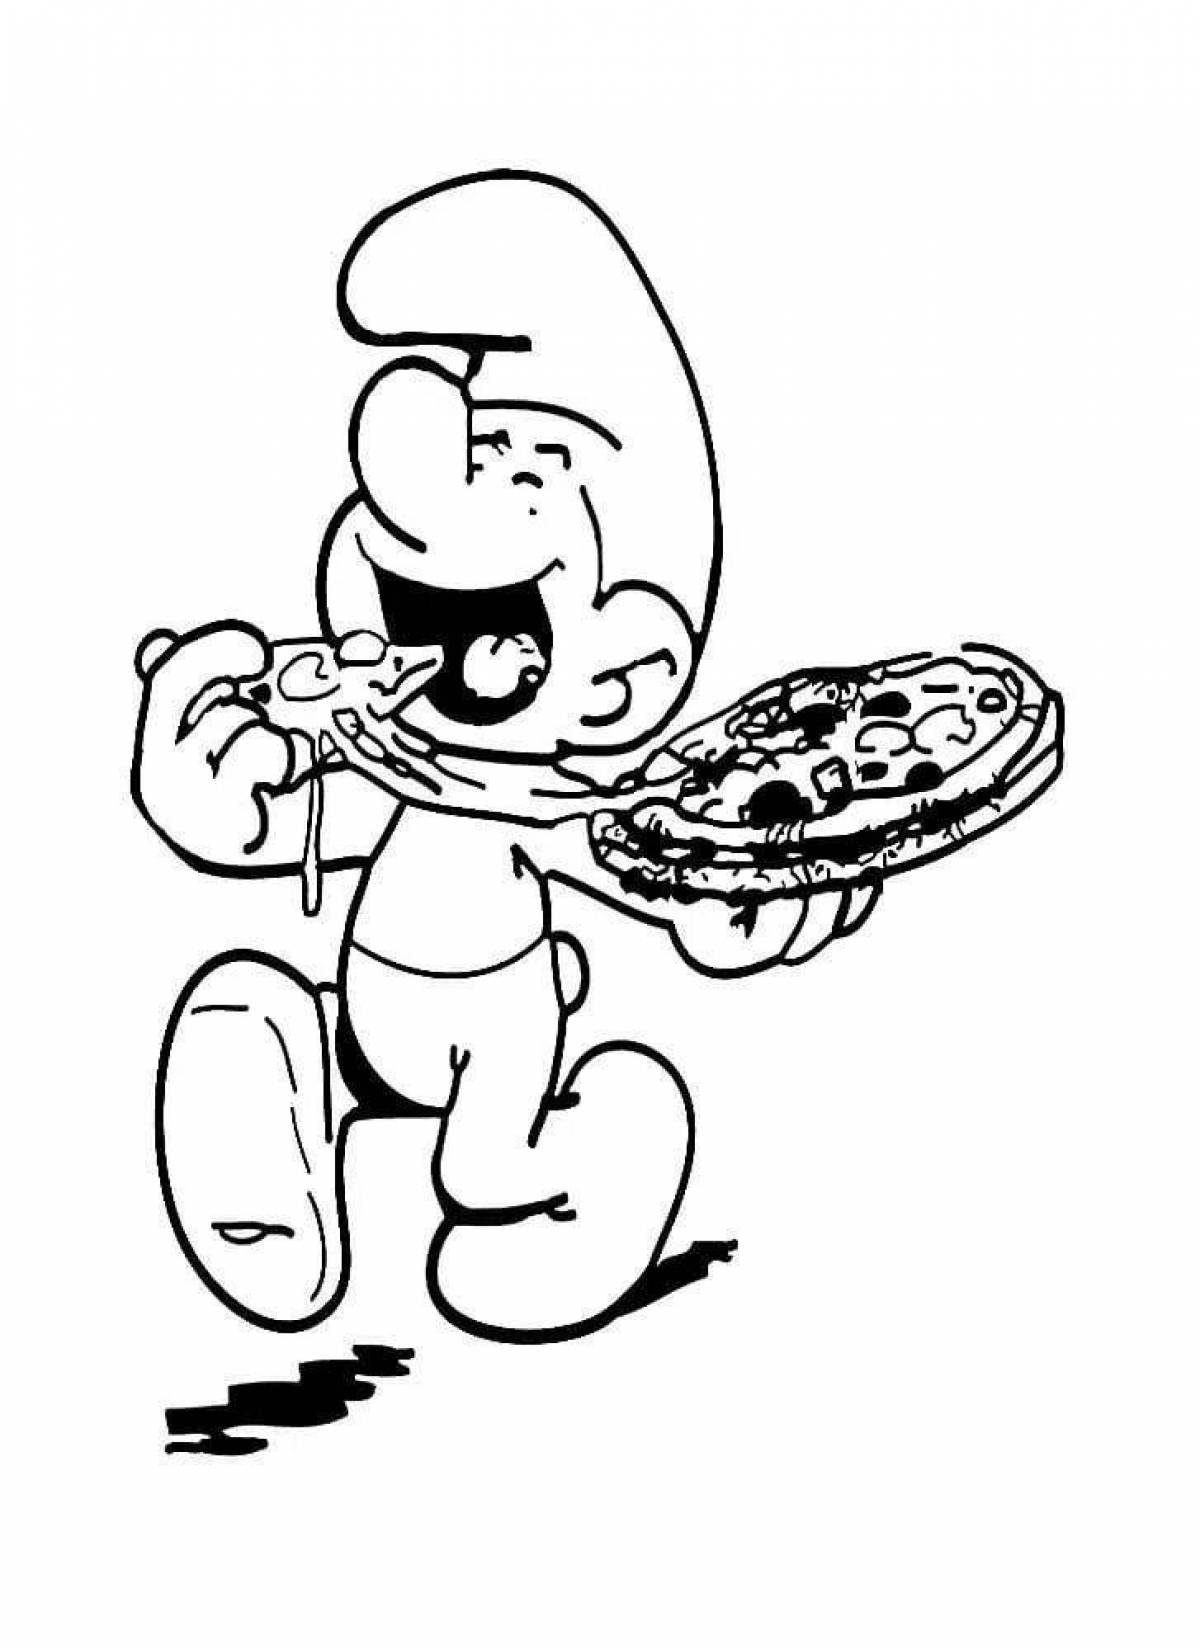 Coloring page fascinating pizzeria